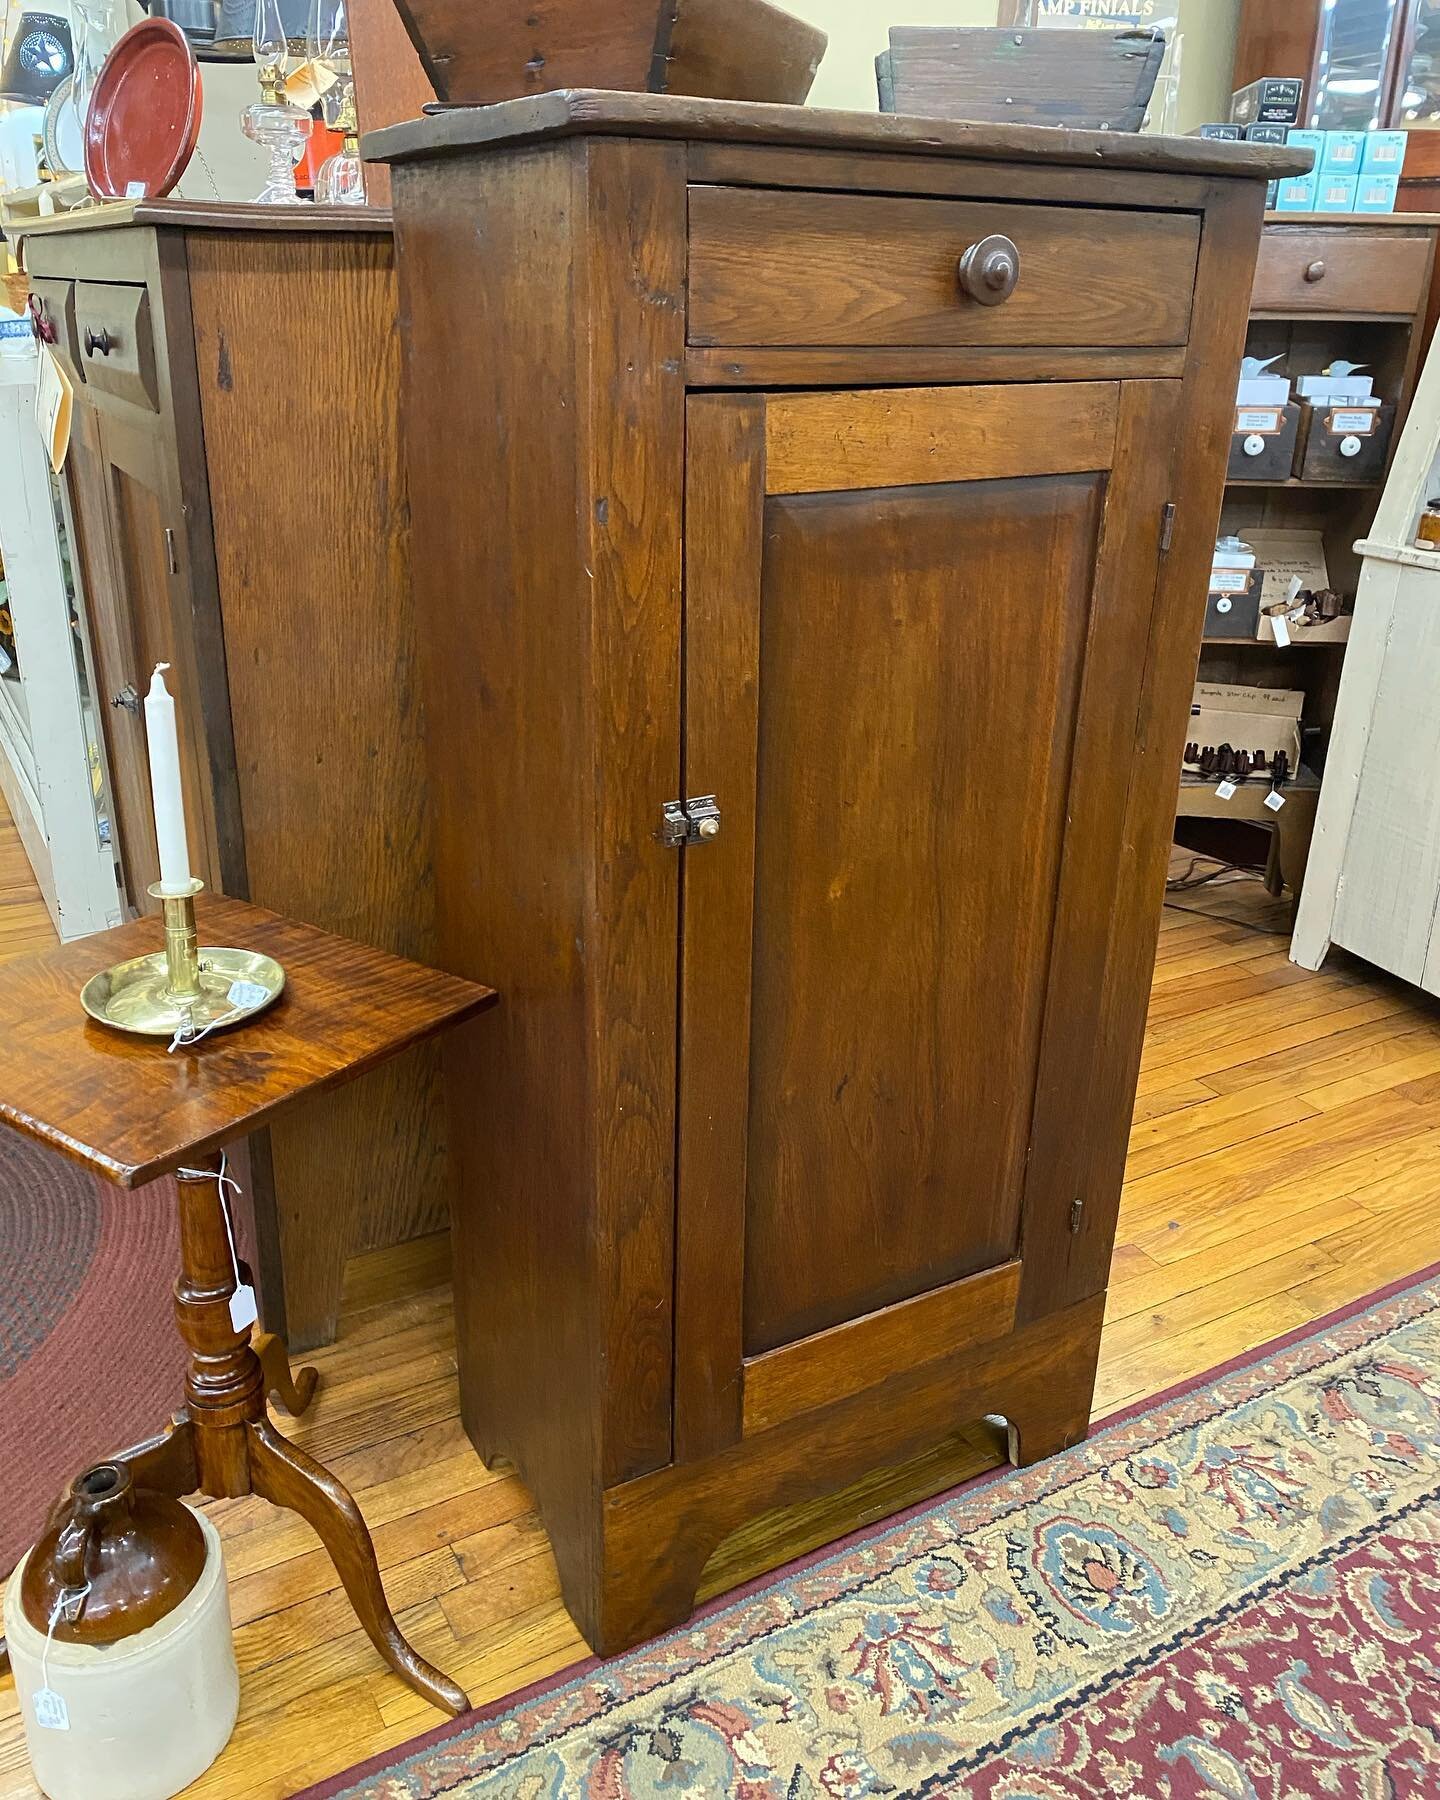 Walnut chimney cupboard&hellip;. Circa late 1800s&hellip;. Offered by The Antique Market in Clinton Tennessee!! Layaway now for fall decorating&hellip;.